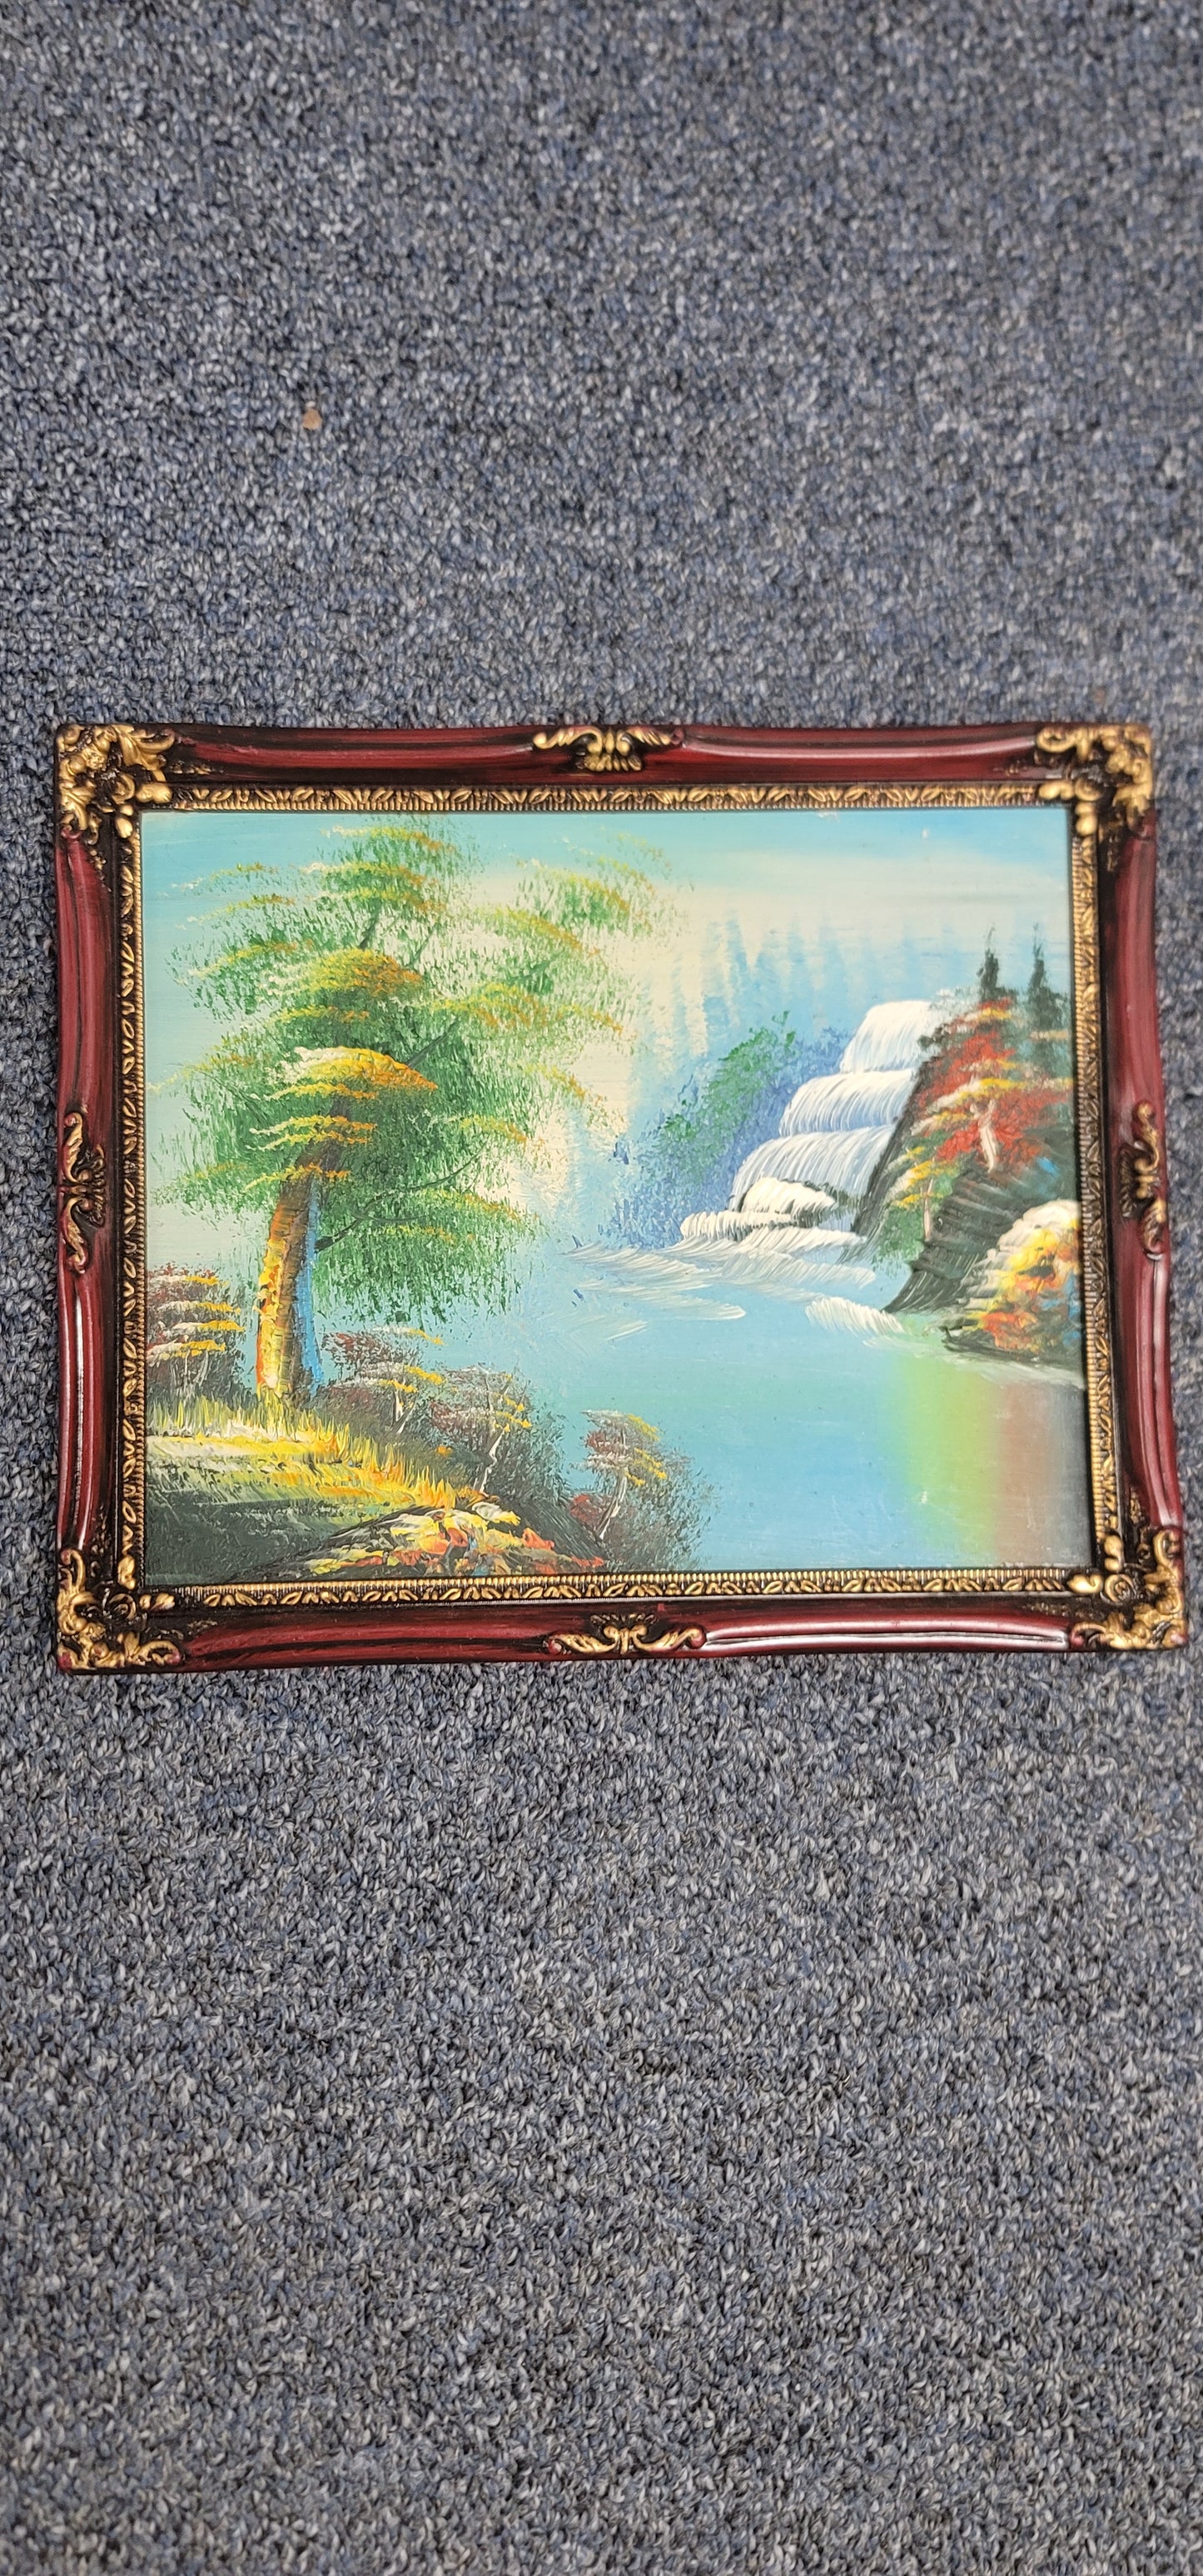 Two Small original waterfall paintings with ornate frames 9x7